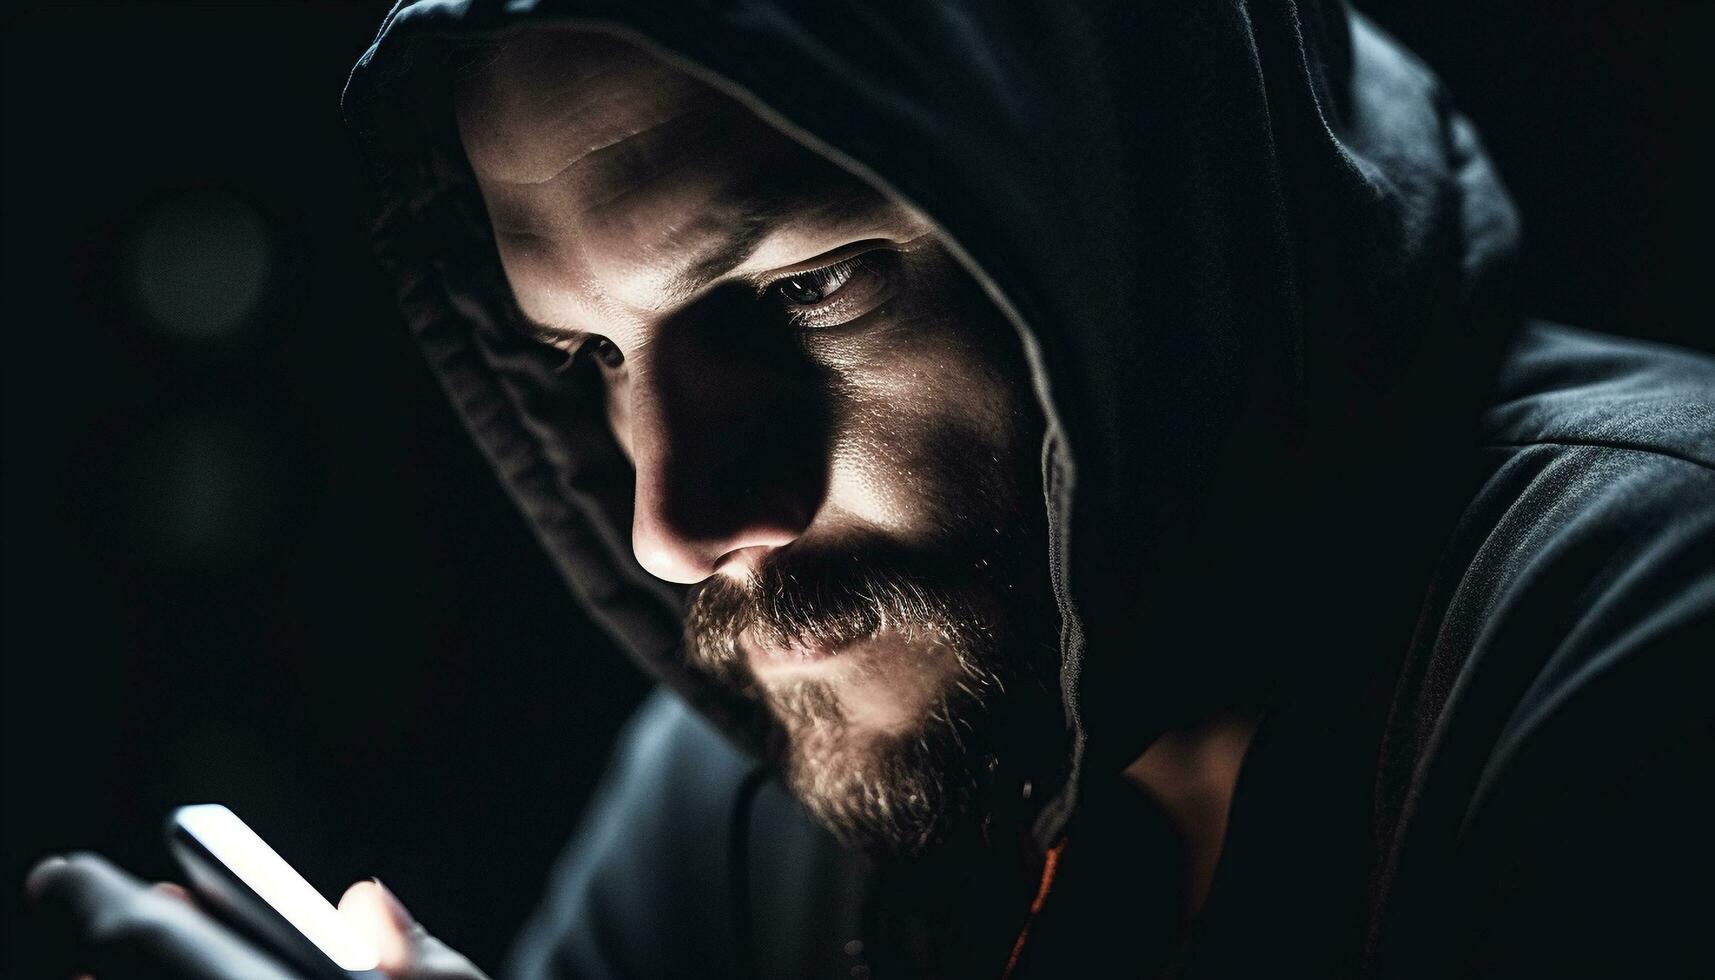 Hooded man in dark clothing looks serious generated by AI photo